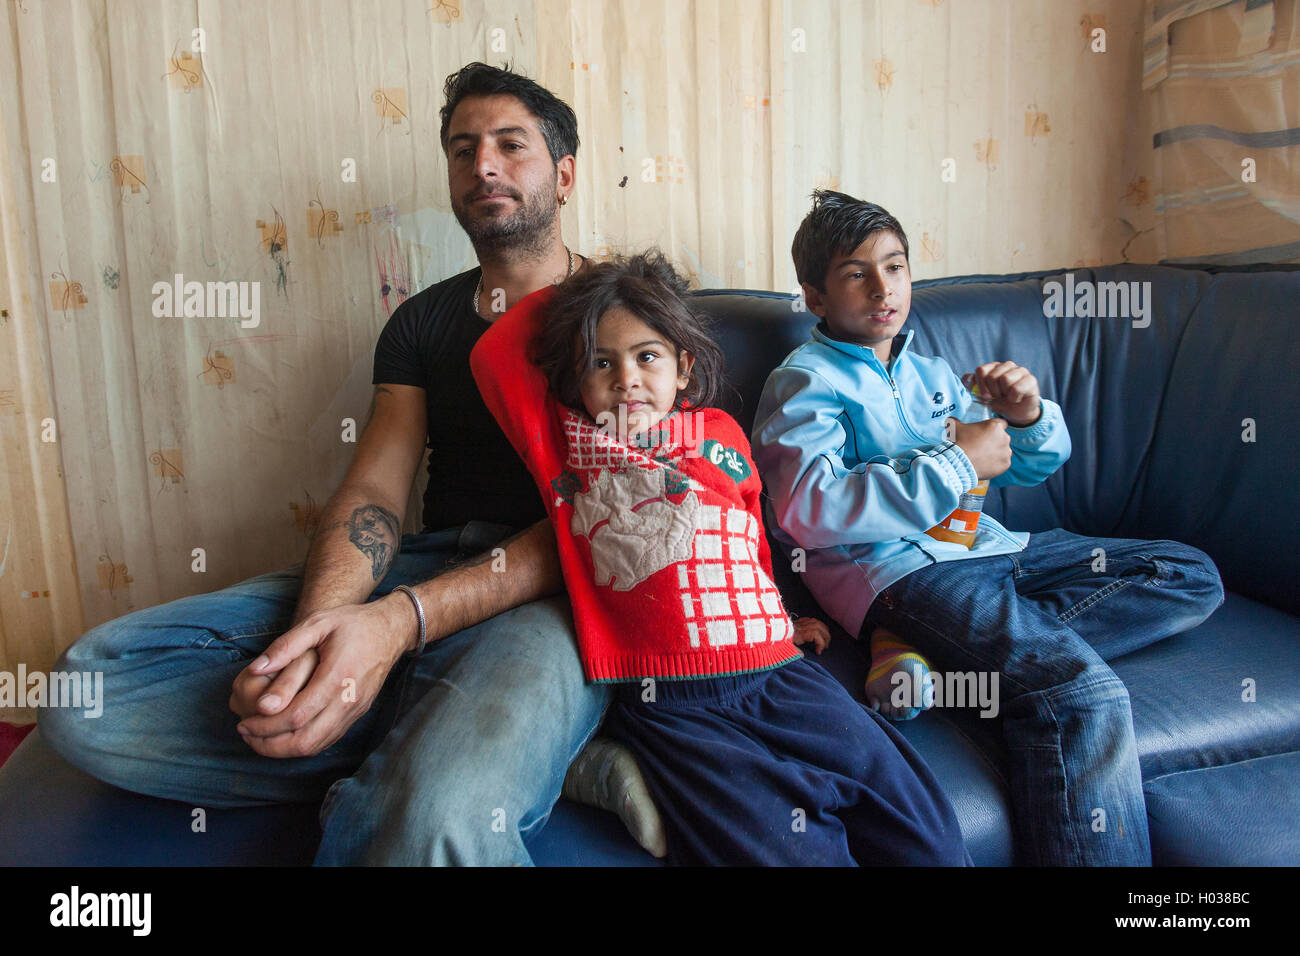 ZAGREB, CROATIA - OCTOBER 21, 2013: Roma man and his children at their home. Stock Photo